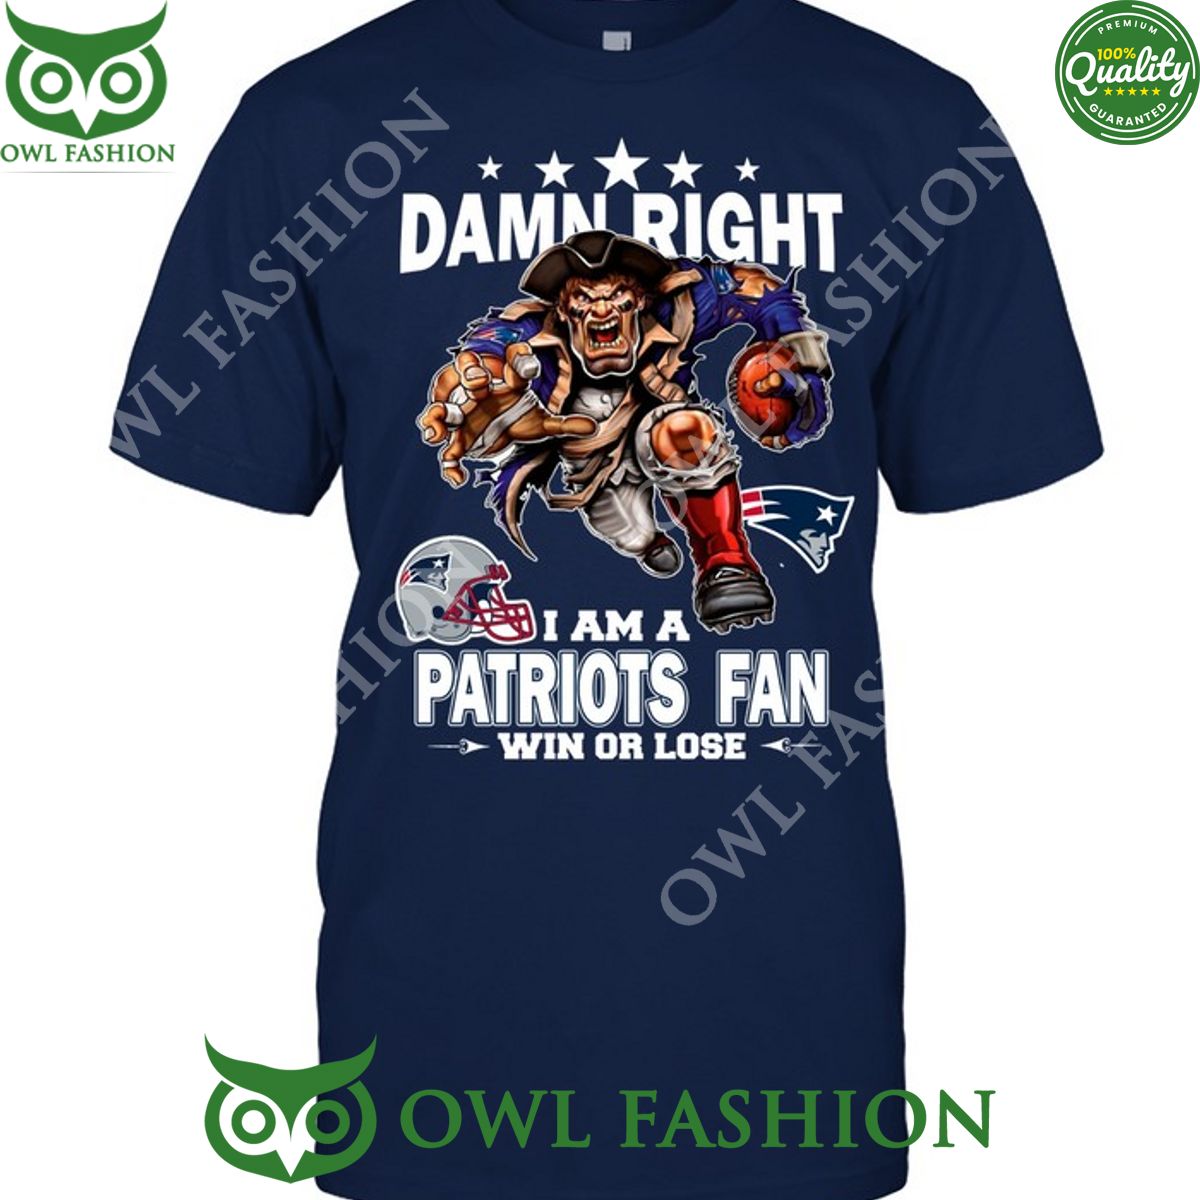 Damn Right New England Patriots NFL Fan Win or lose t shirt